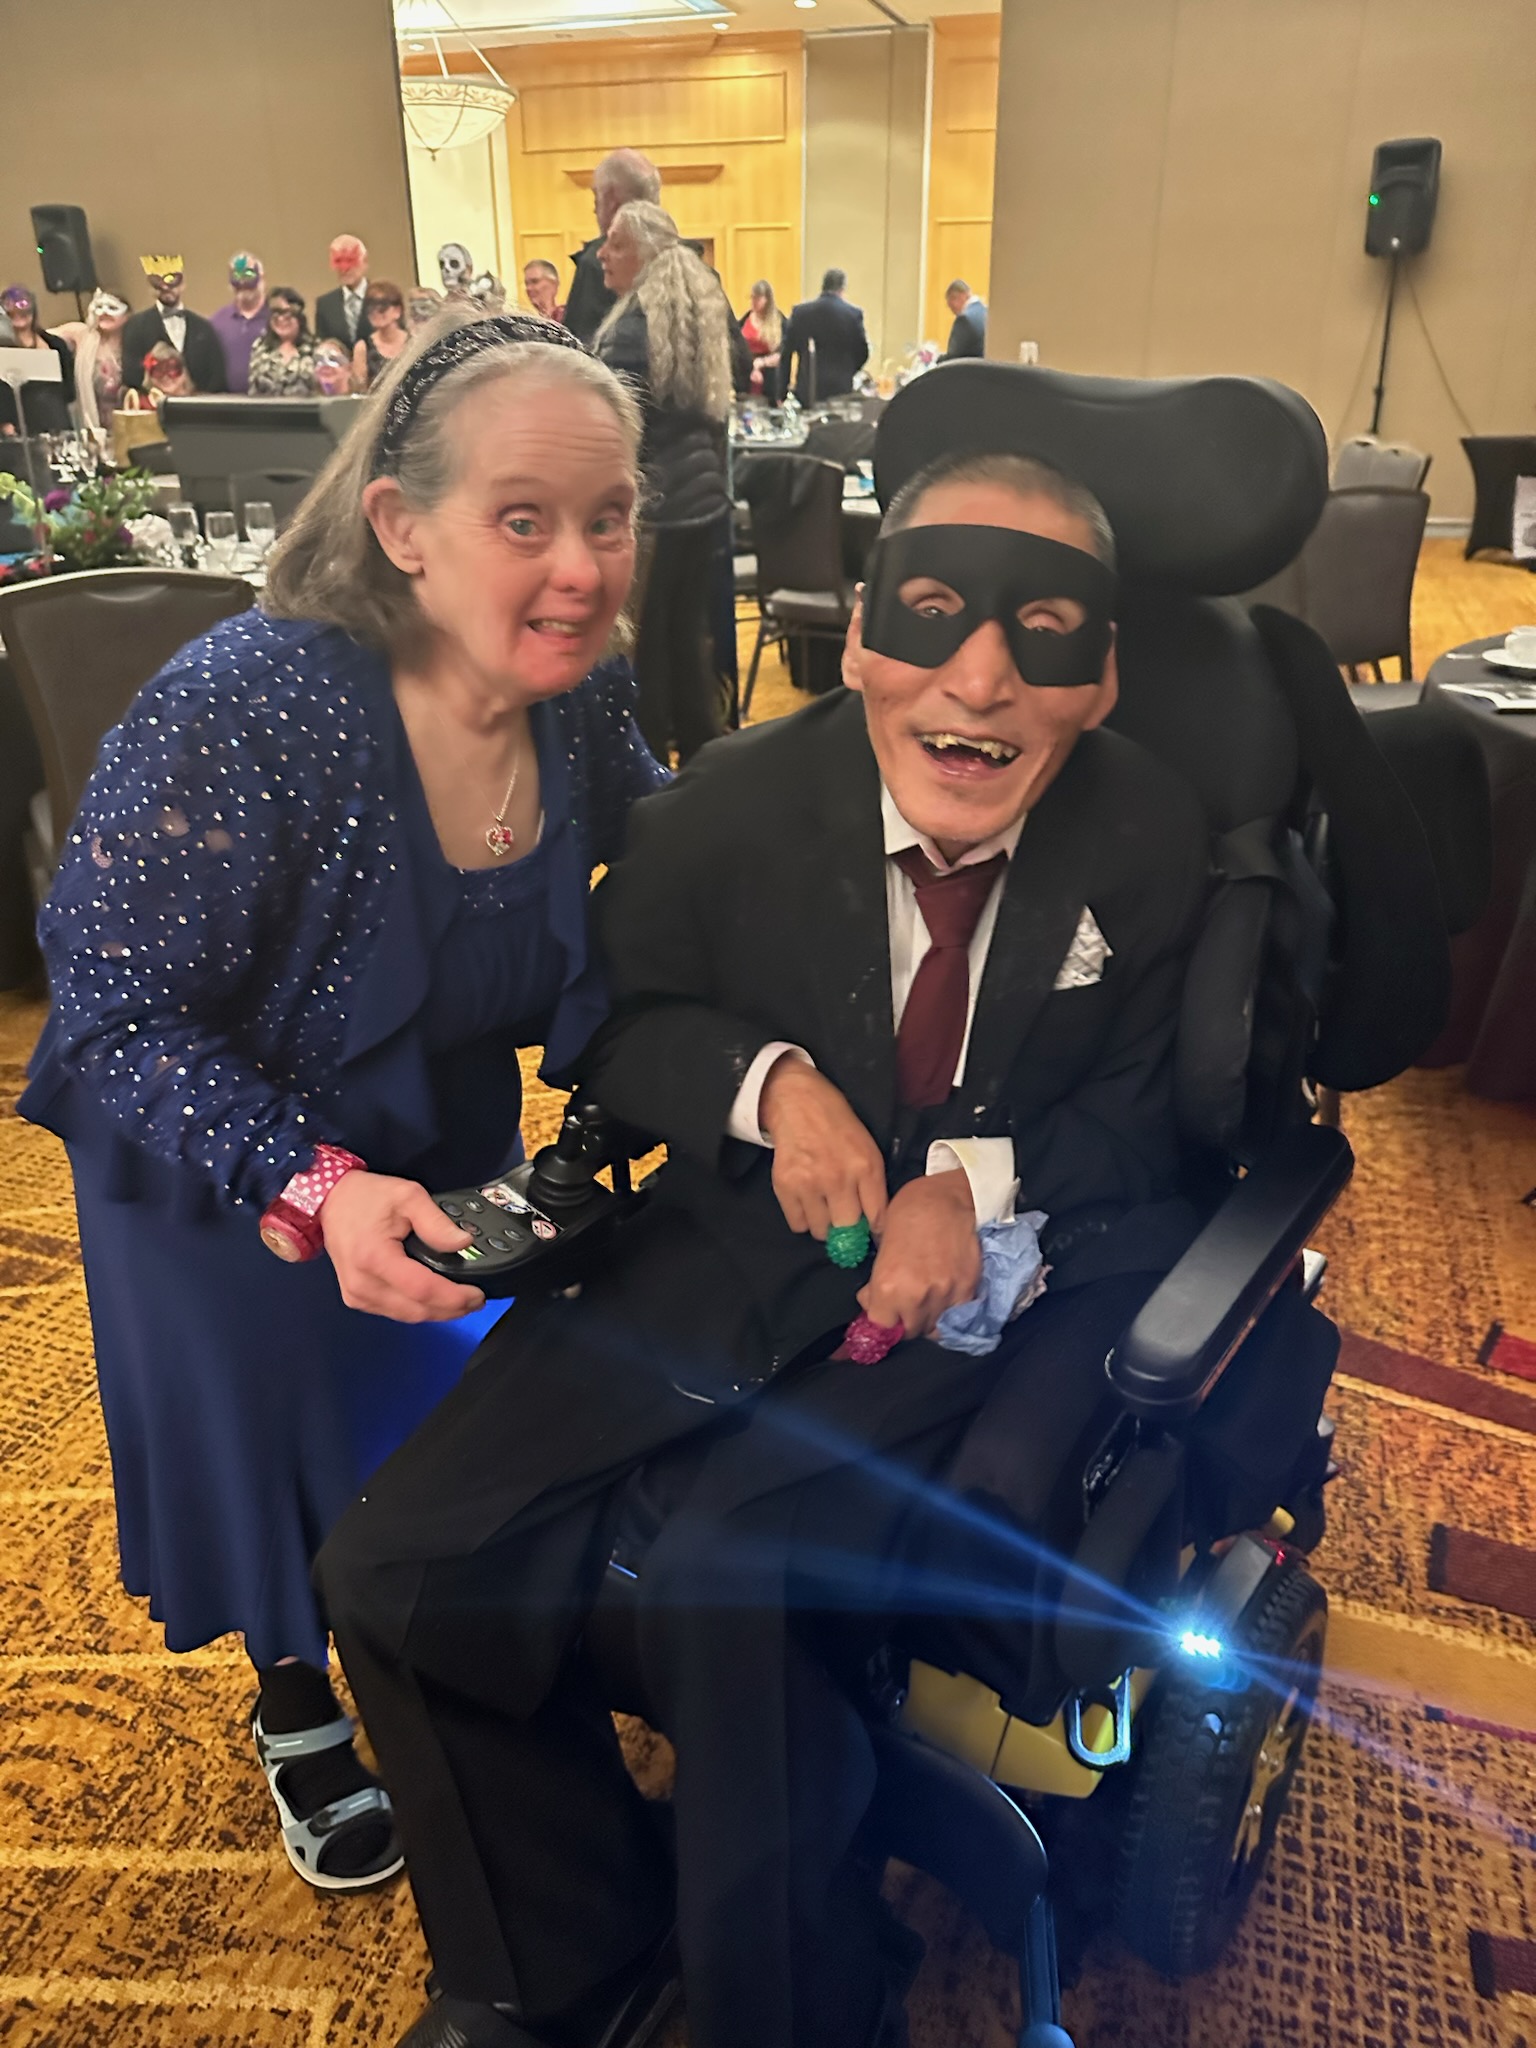 A woman dressed in an elegant blue dress and a man wearing a suit and black eye mask attend Hope's annual auction